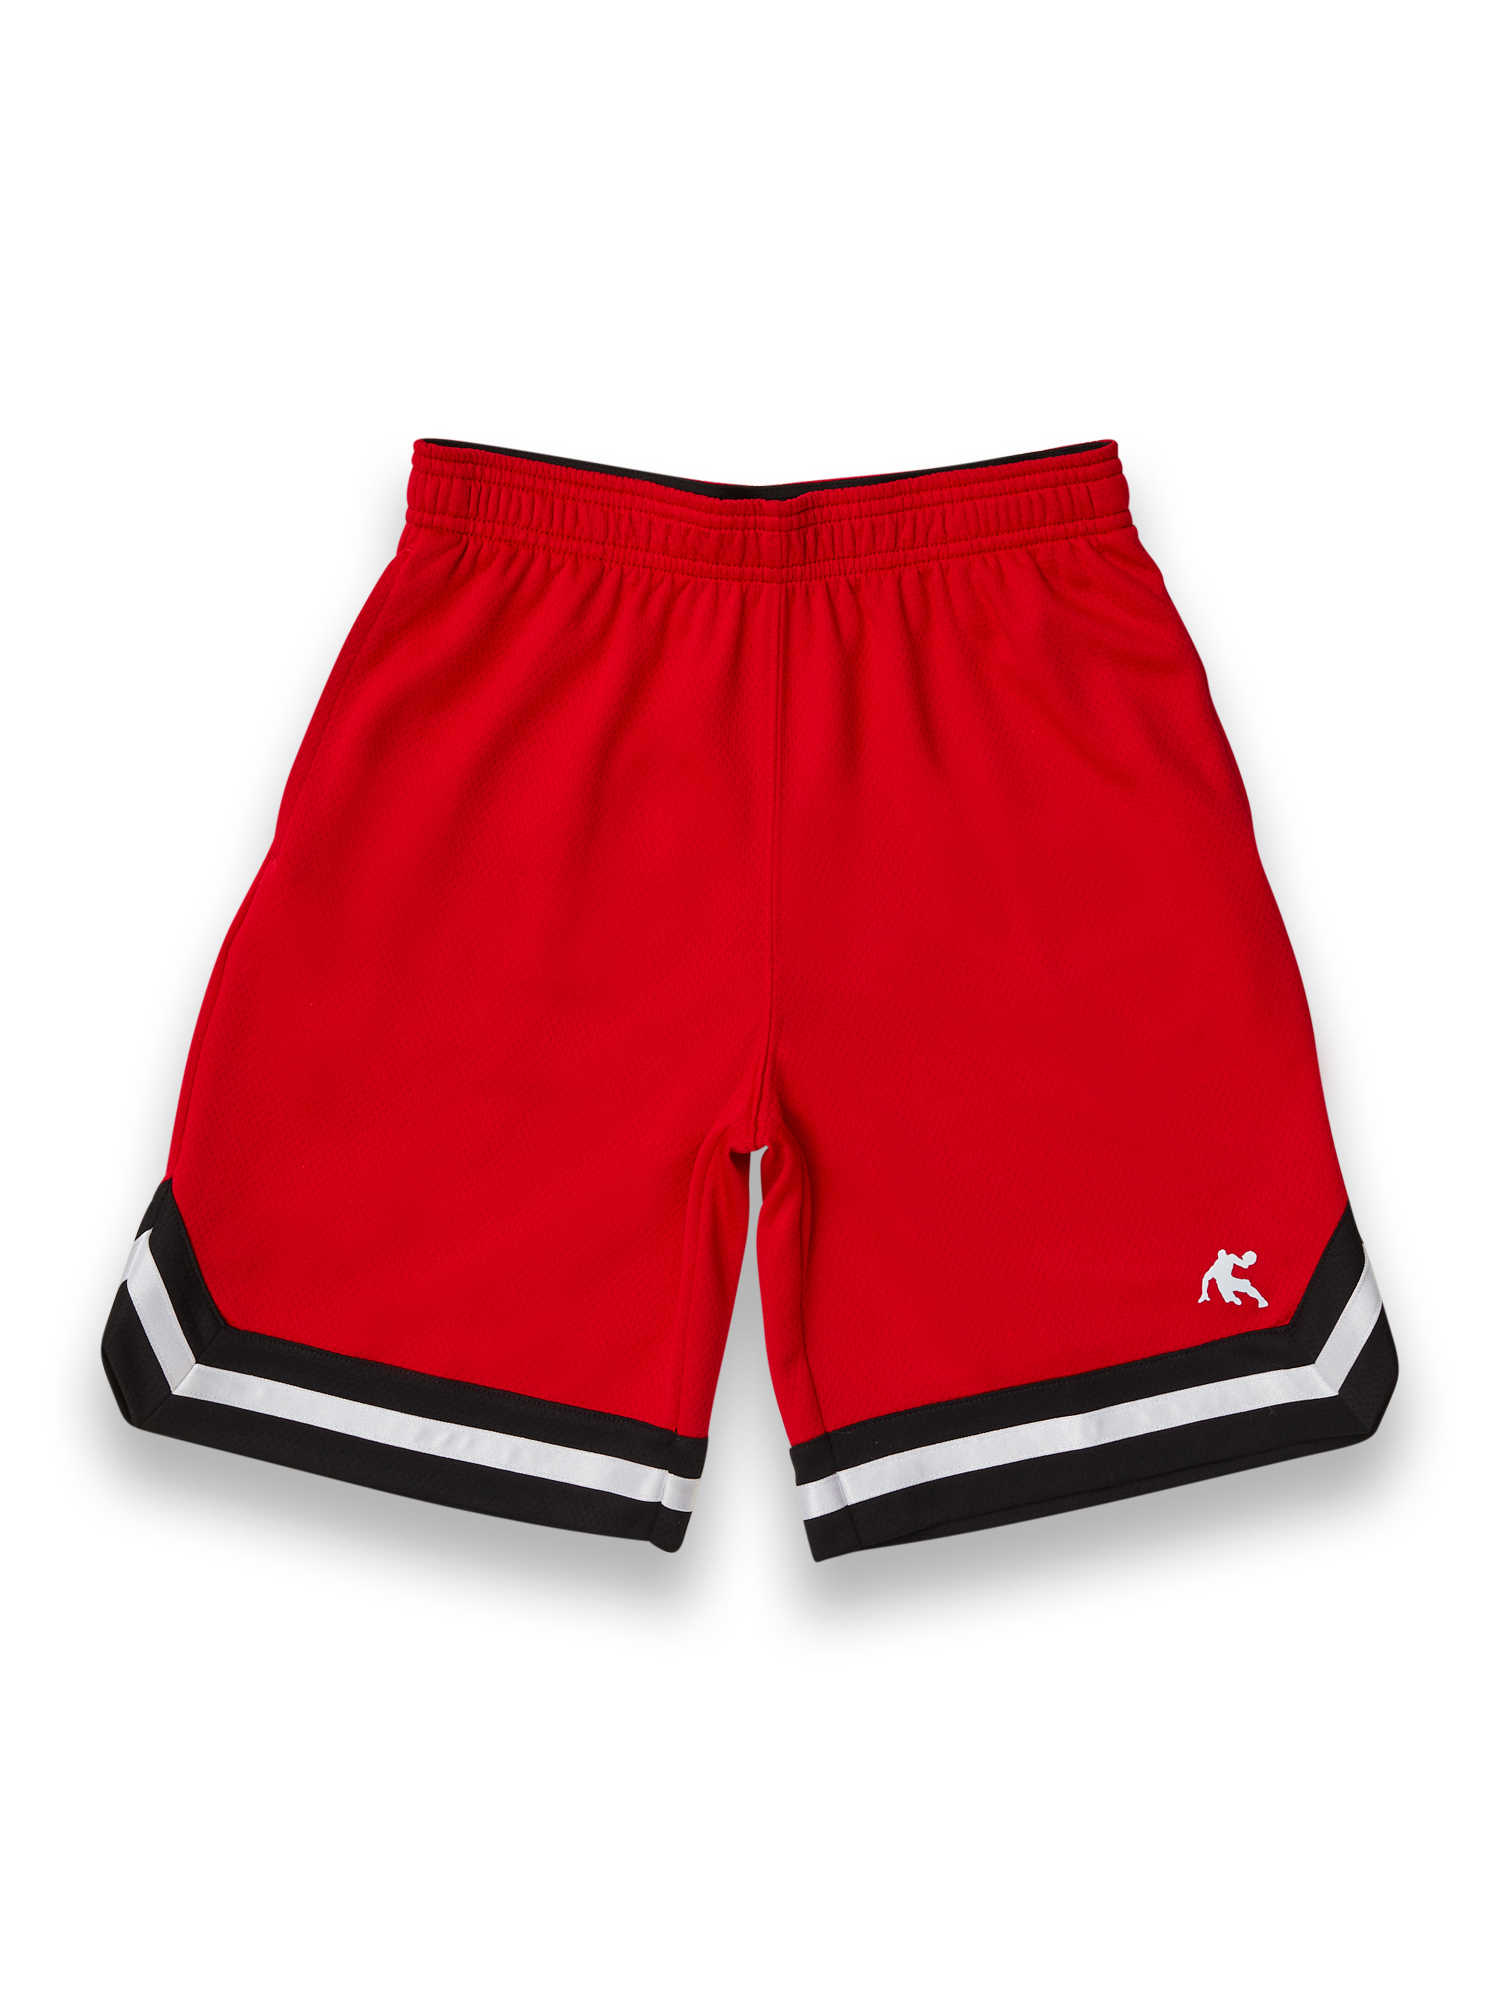 AND1 Boys Jersey Tank & Basketball Shorts 2-Piece Outfit Set, Sizes 4-18 - image 4 of 5